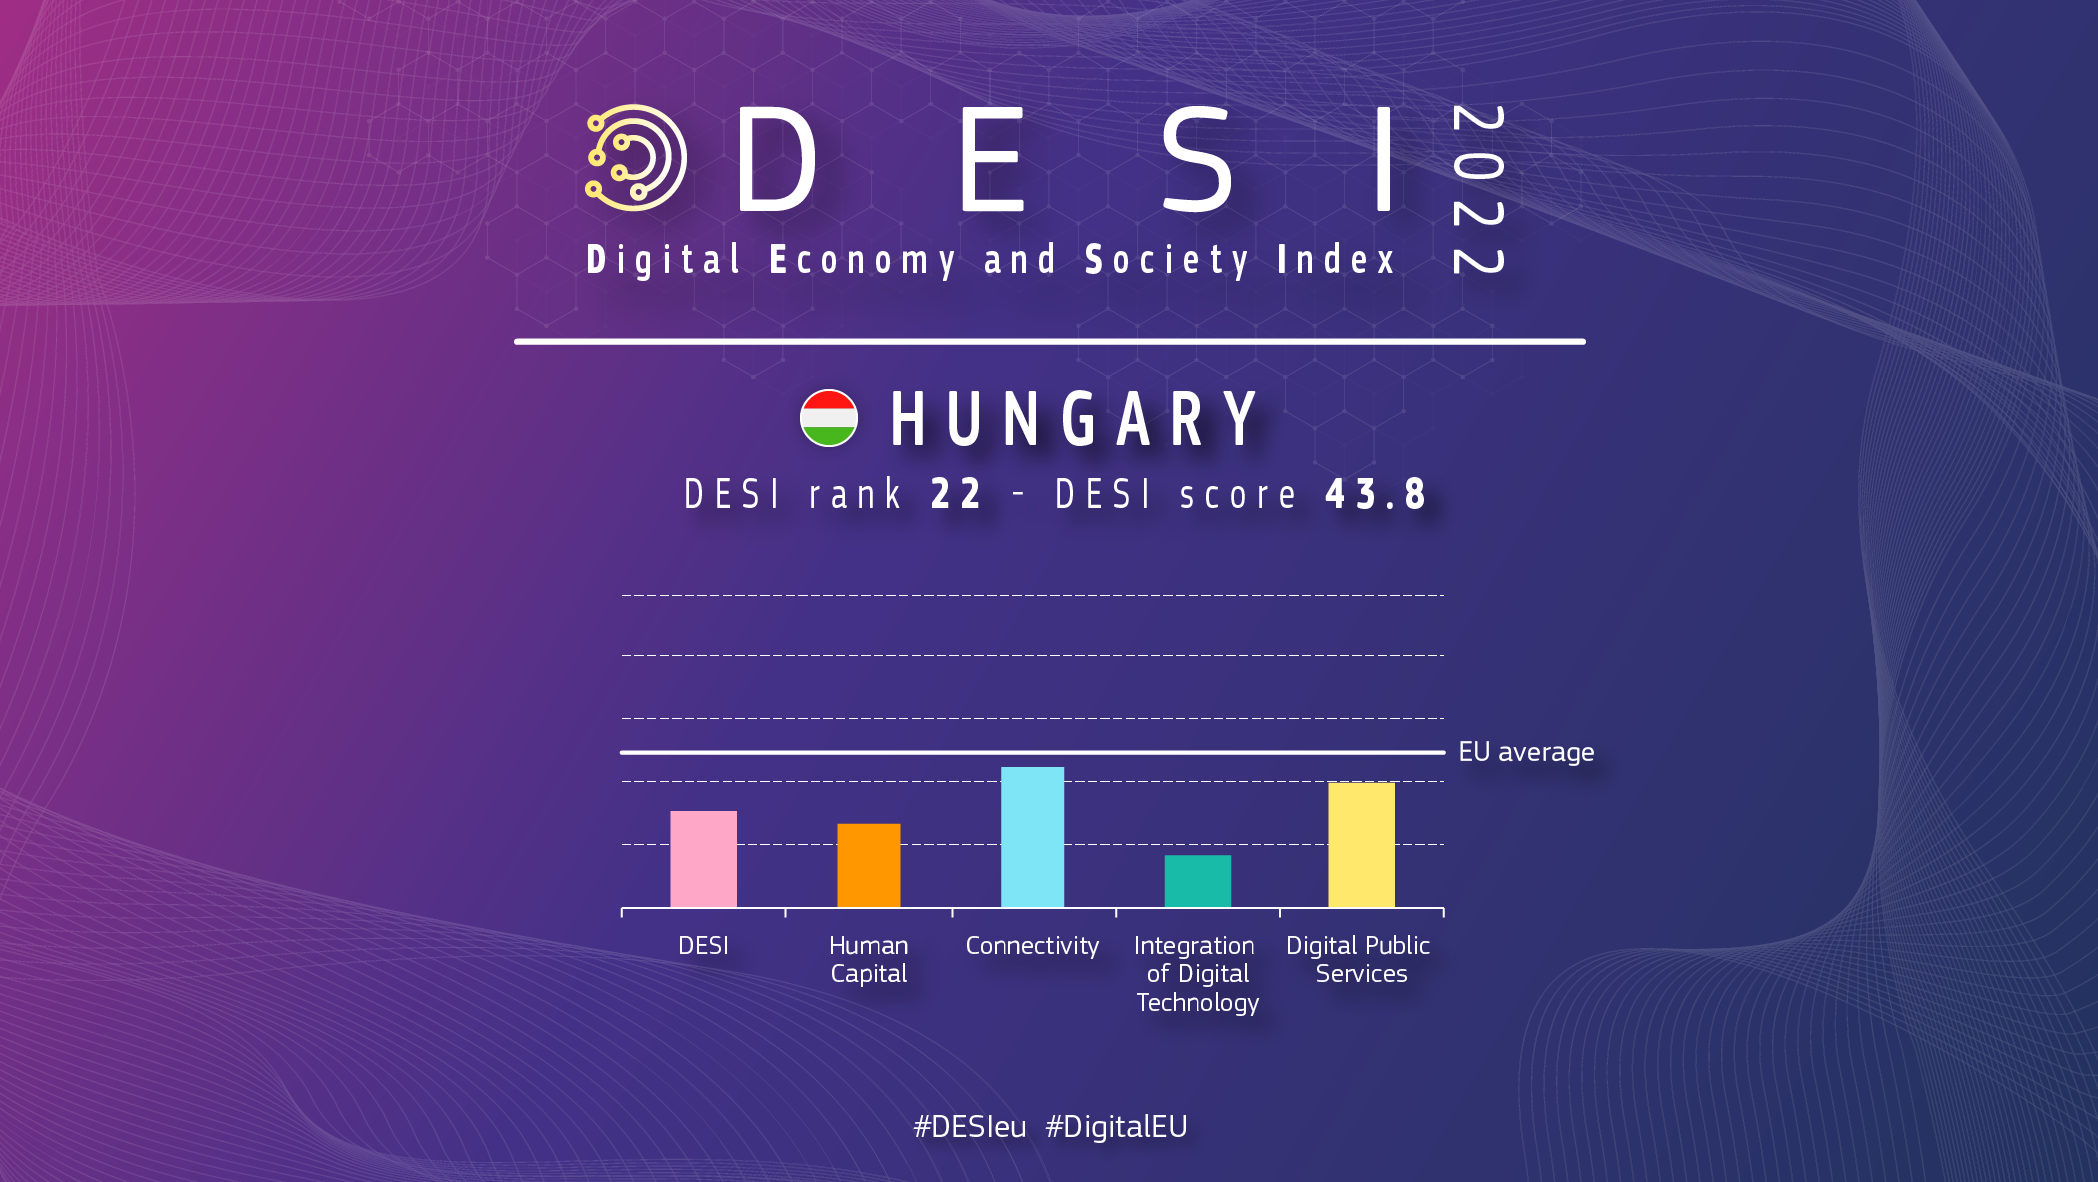 Graphic overview of Hungary in DESI showing a ranking of 22 and a score of 43.8